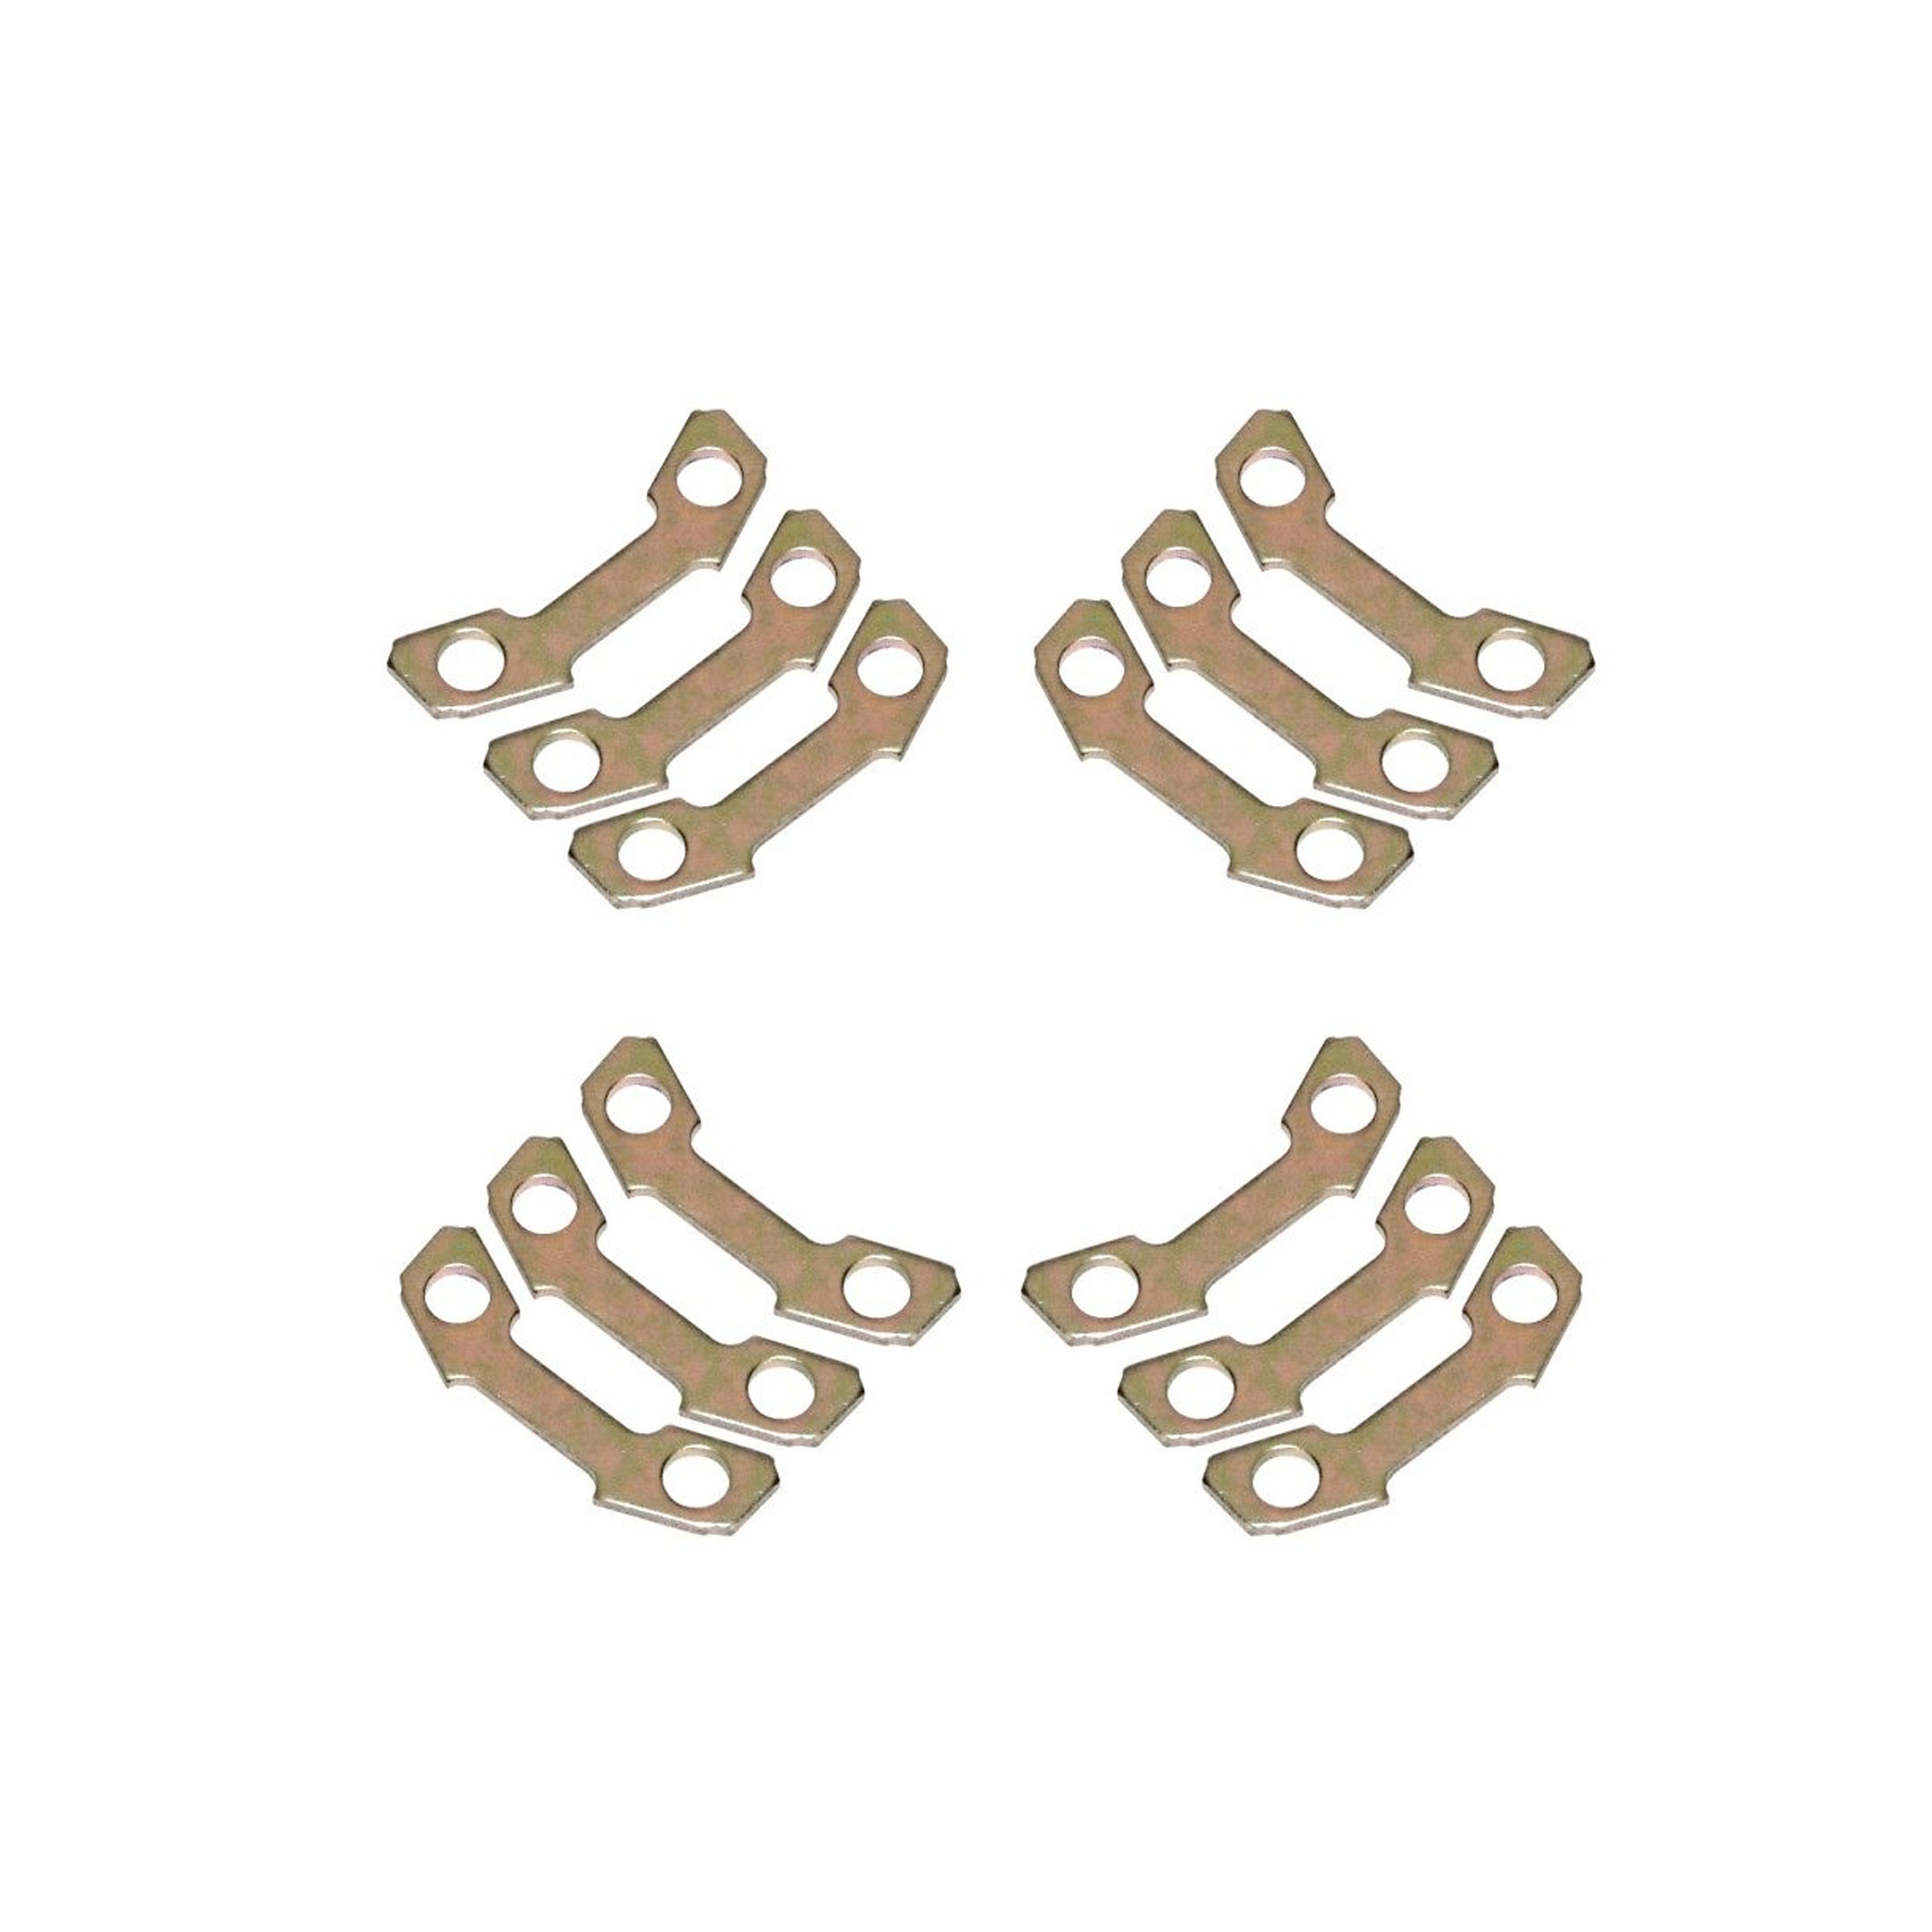 VW Type 1 CV Joint Torque Distribution Washers - Set of 12 Pieces